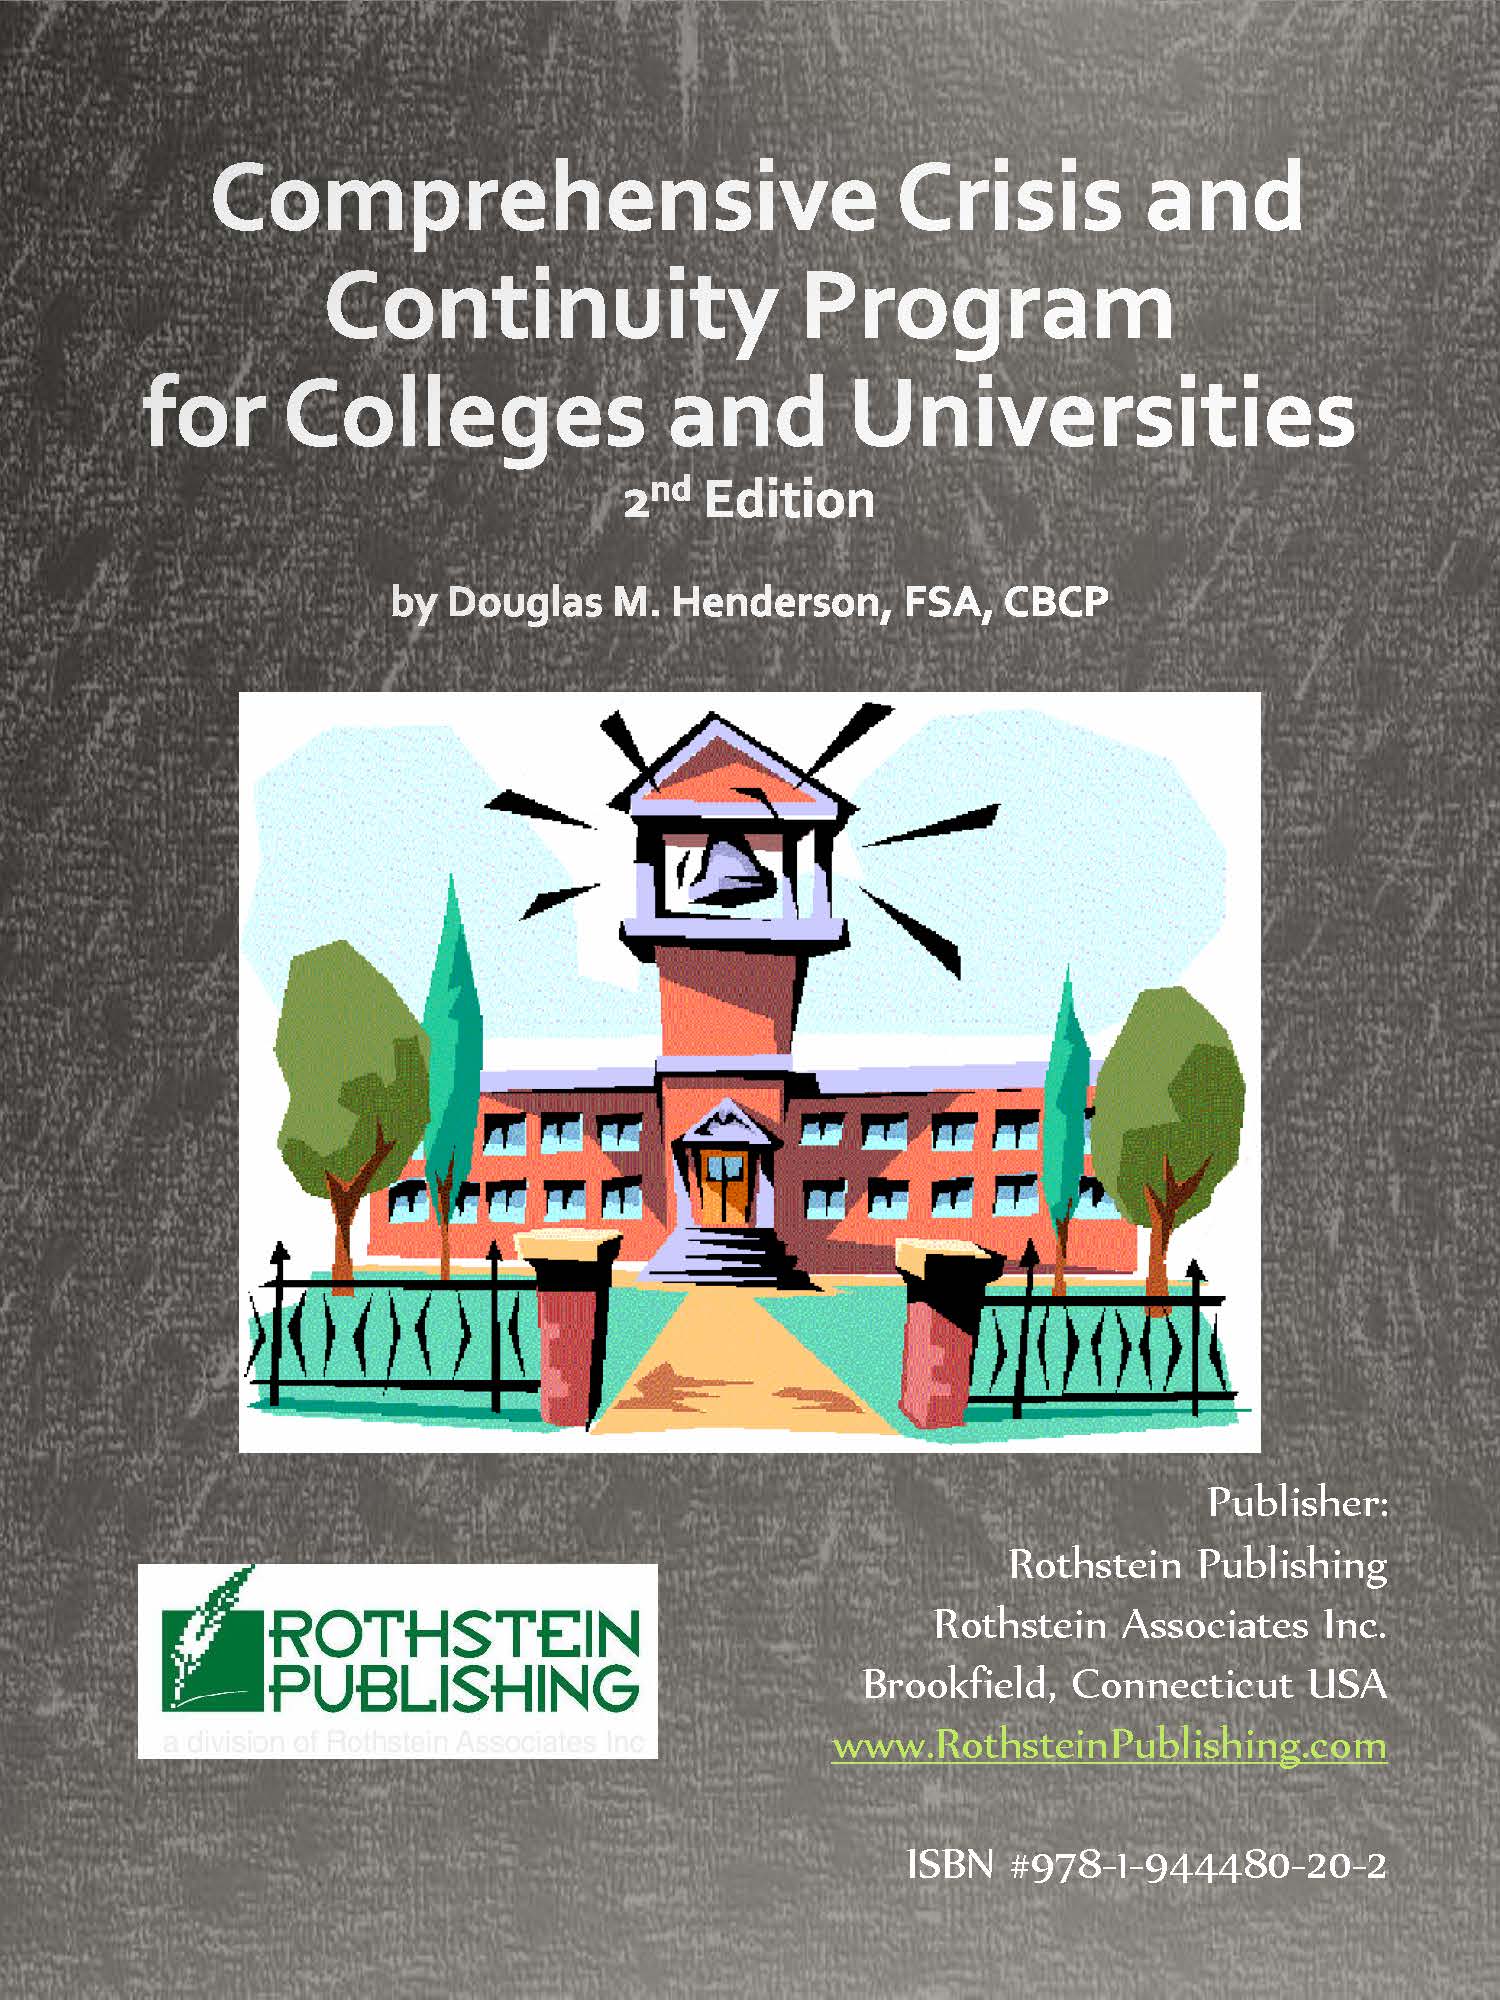 comprehensive-crisis-and-continuity-program-for-colleges-and-universities-by-douhlas-m-henderson-rothstein-publishing